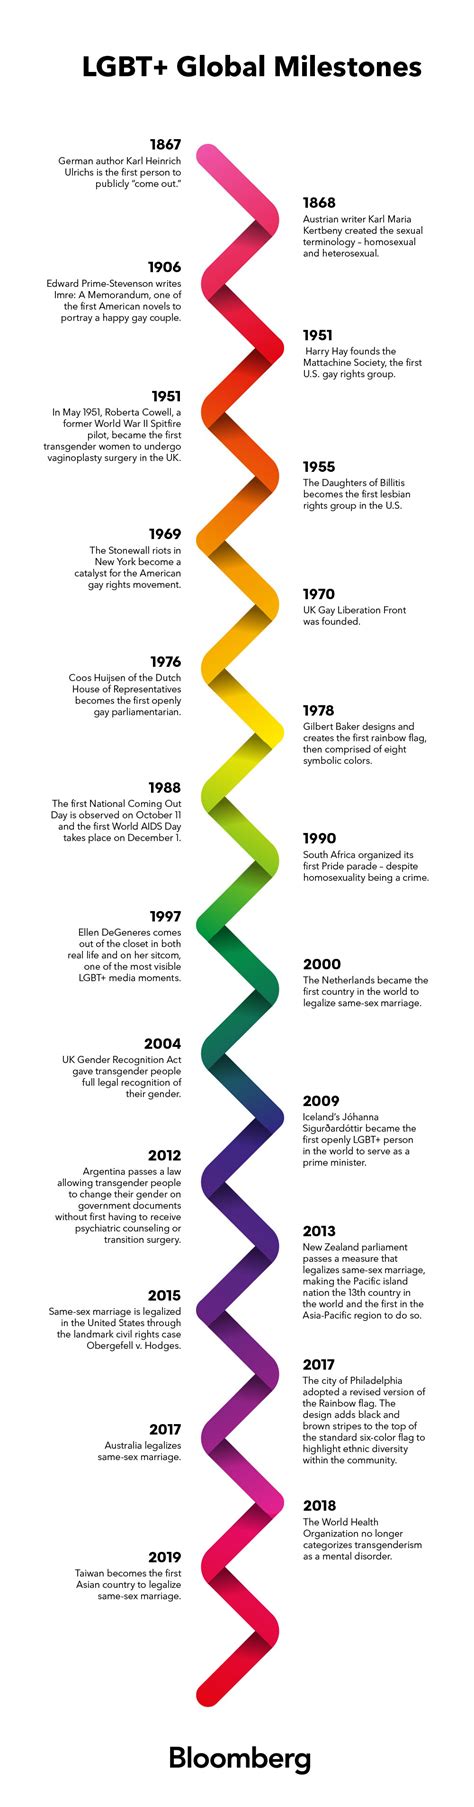 Gay Rights Movement Timeline